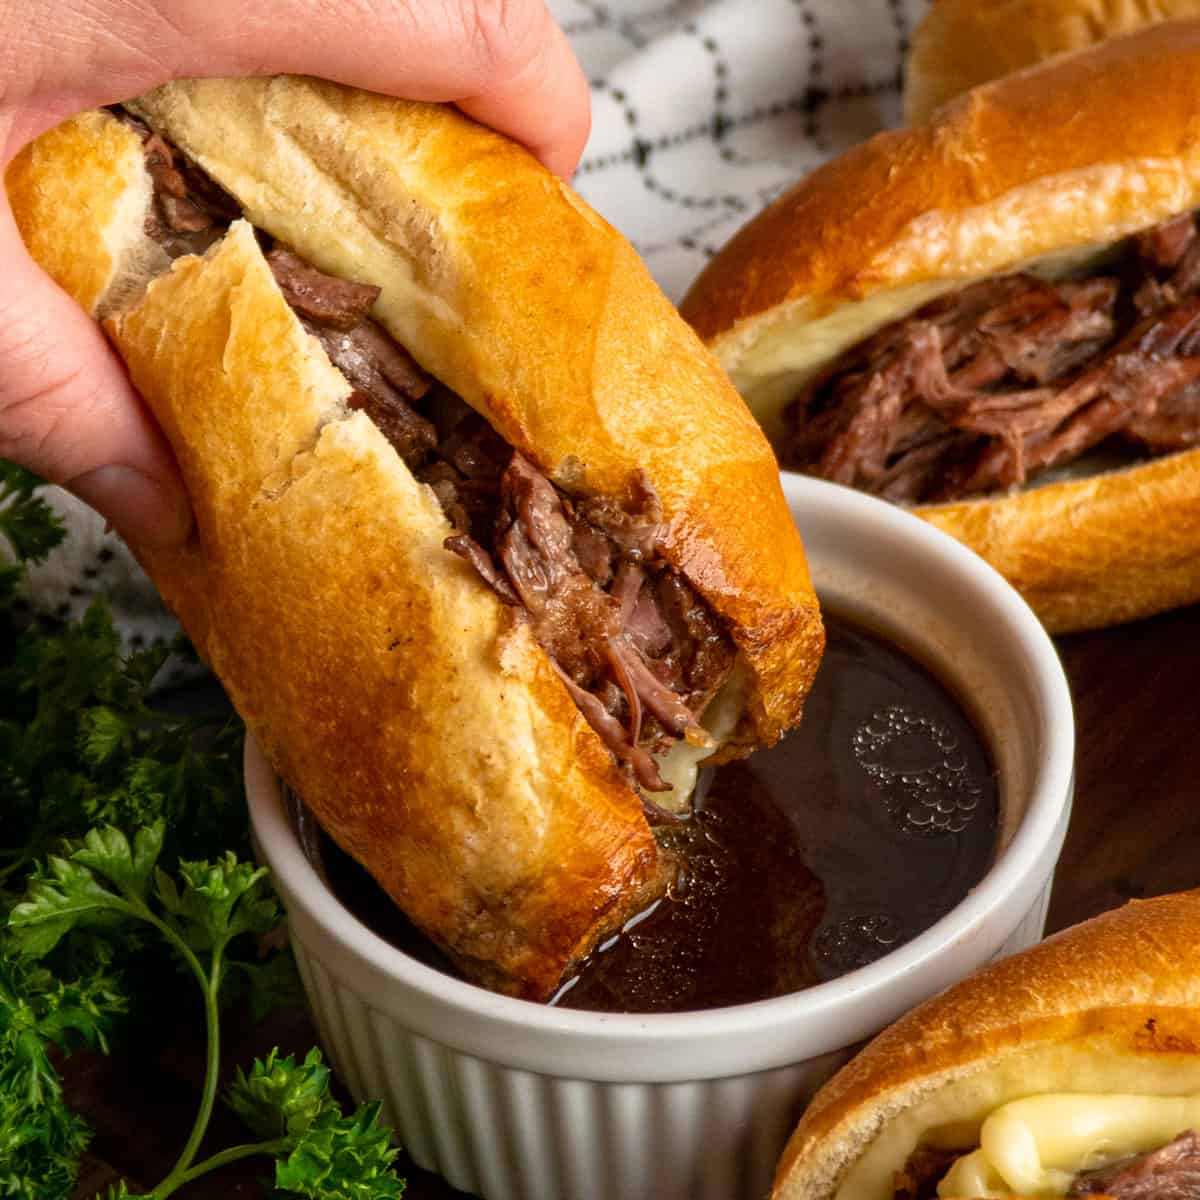 A hand dipping a French dip sandwich into au jus sauce